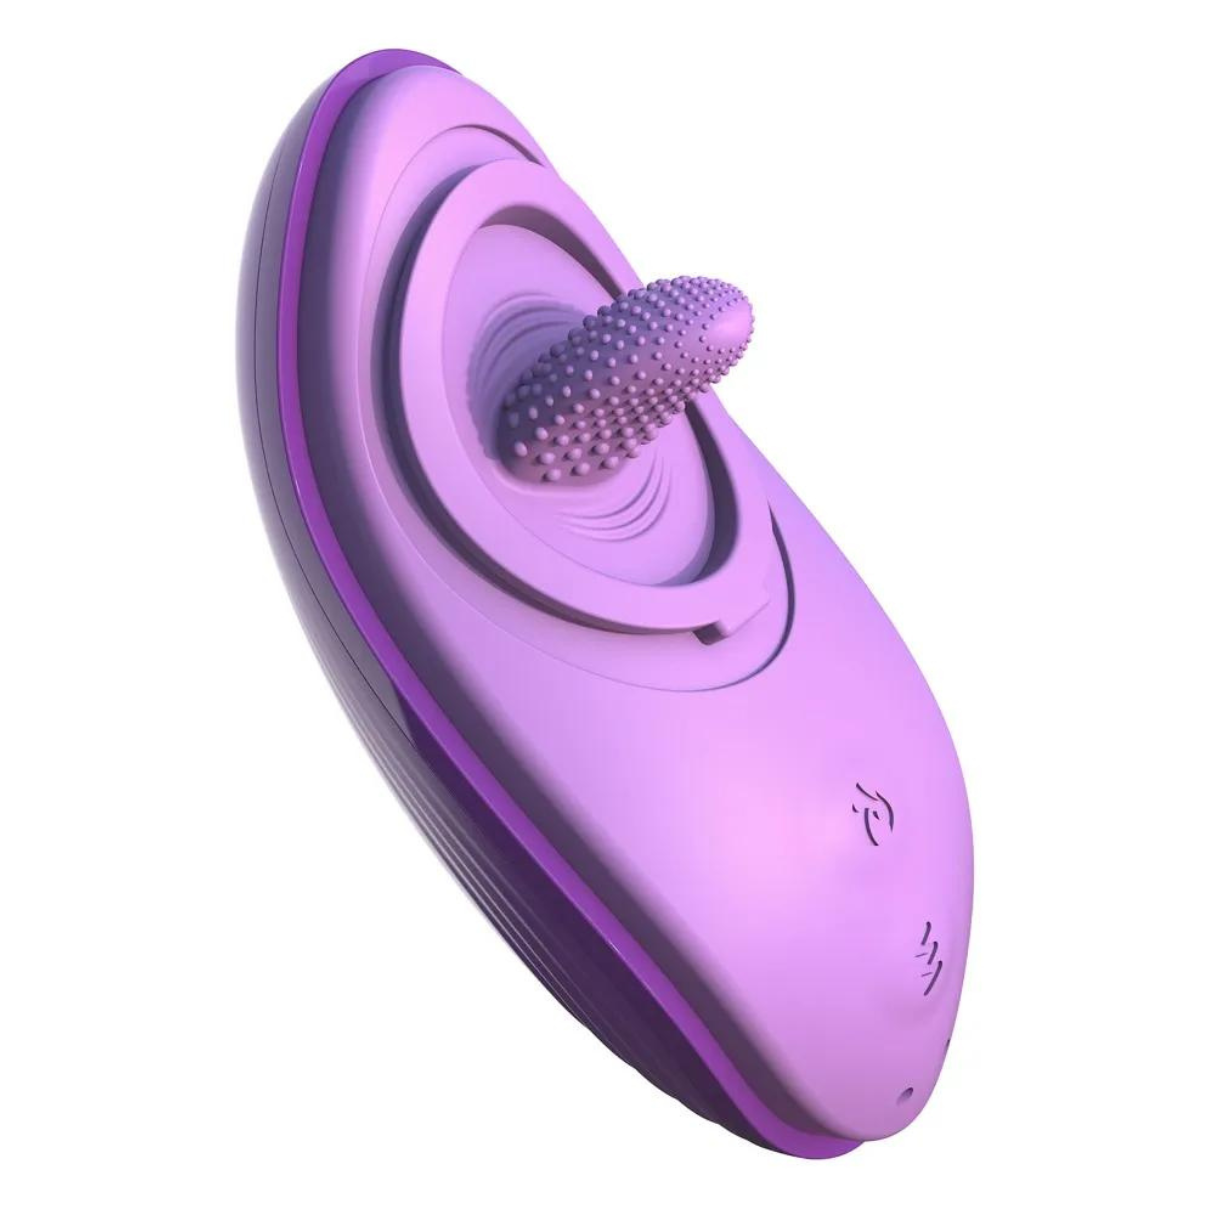 FANTASY FOR HER Her Silicone Fun Tongue Vibrator